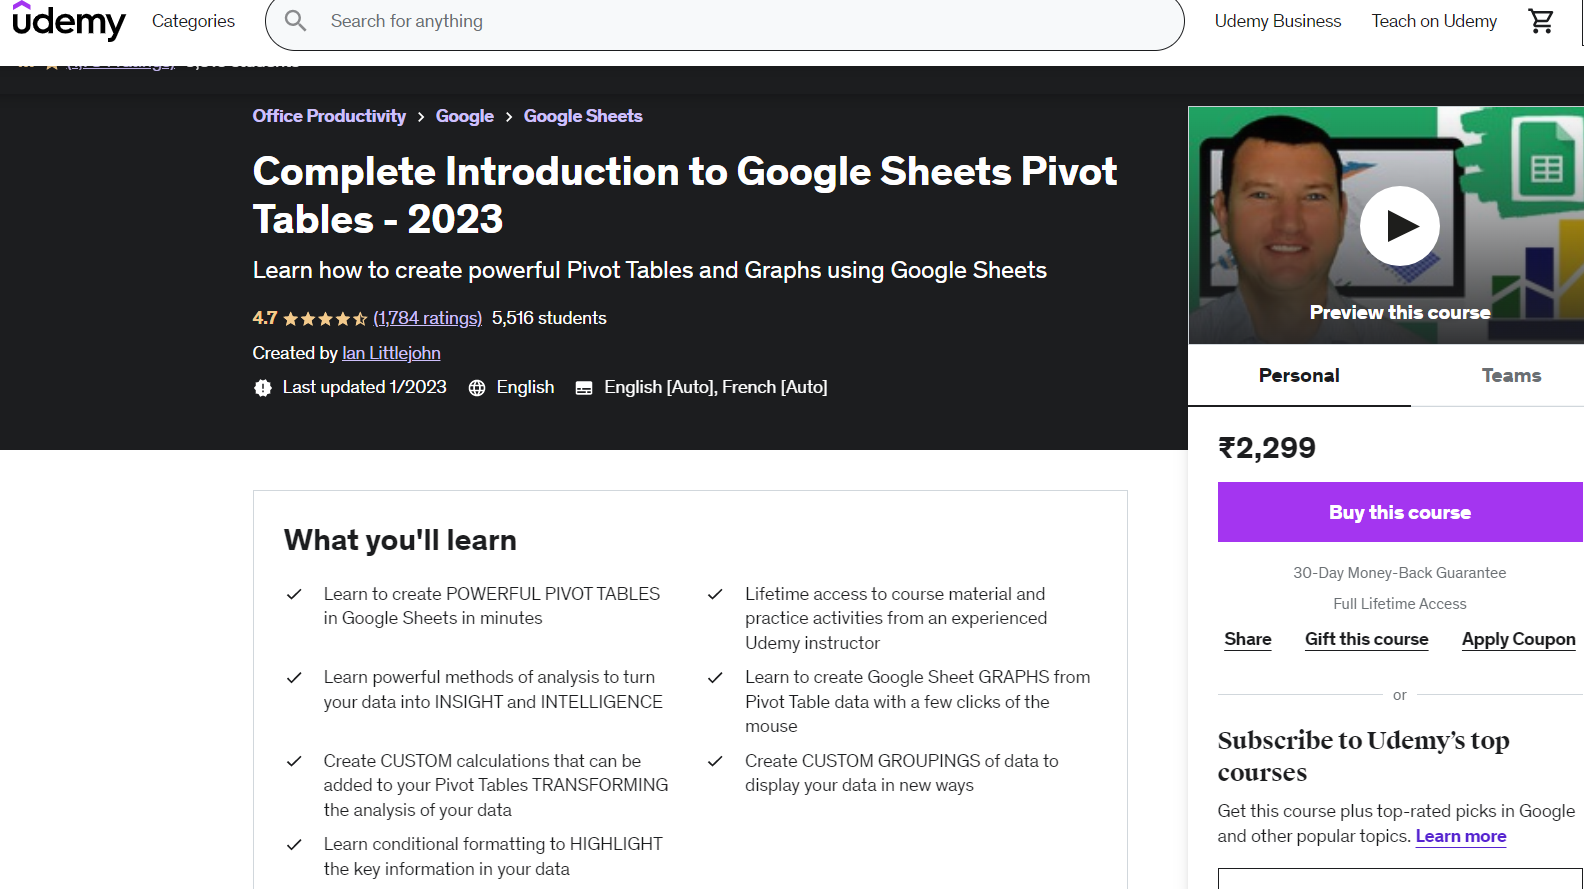 Complete Introduction to Google Sheets Pivot Tables